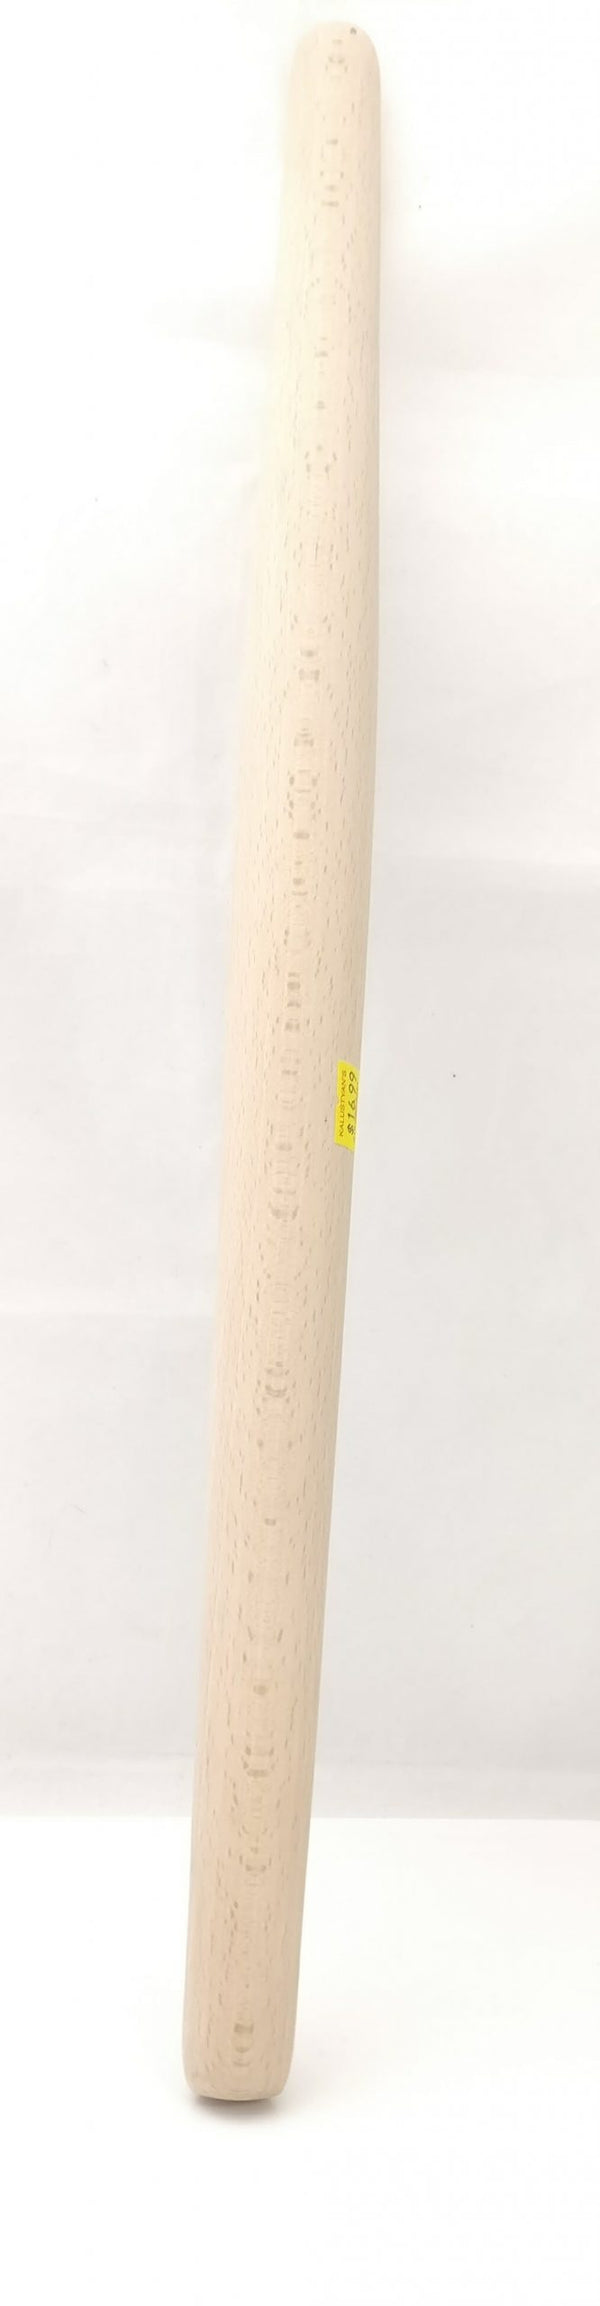 Rolling Pins, Wodden Tapered